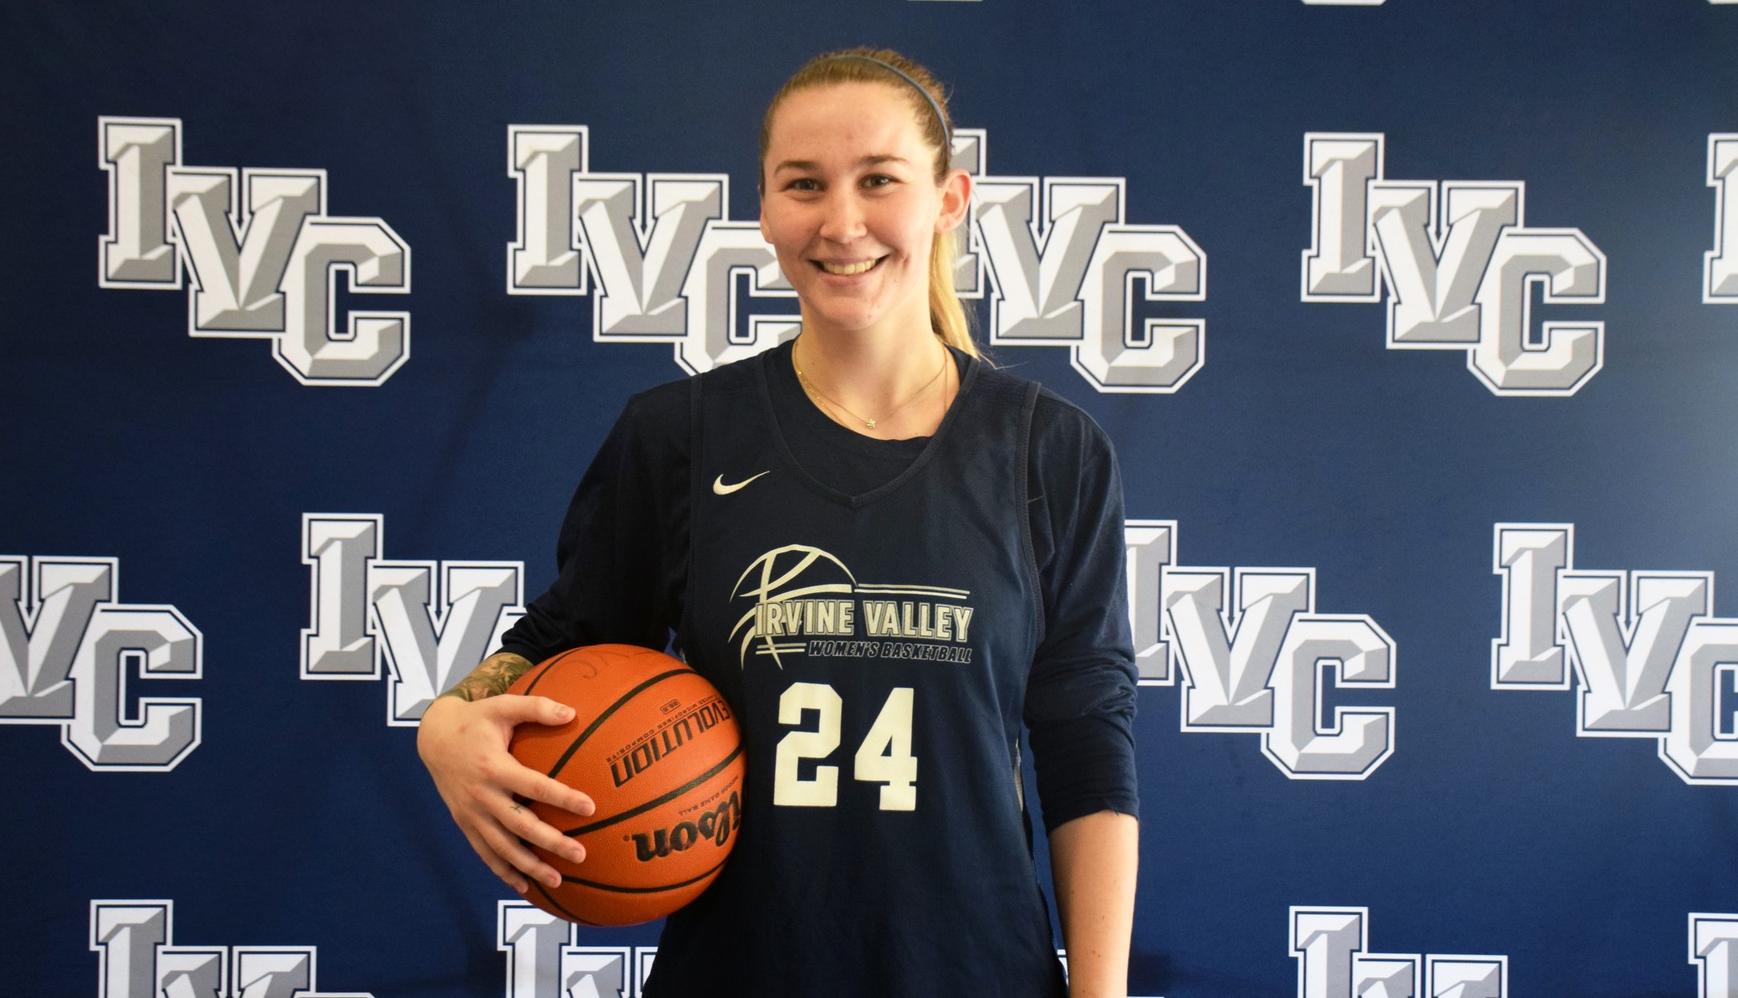 Basketball player Lexi Vail selected as one of best in the state